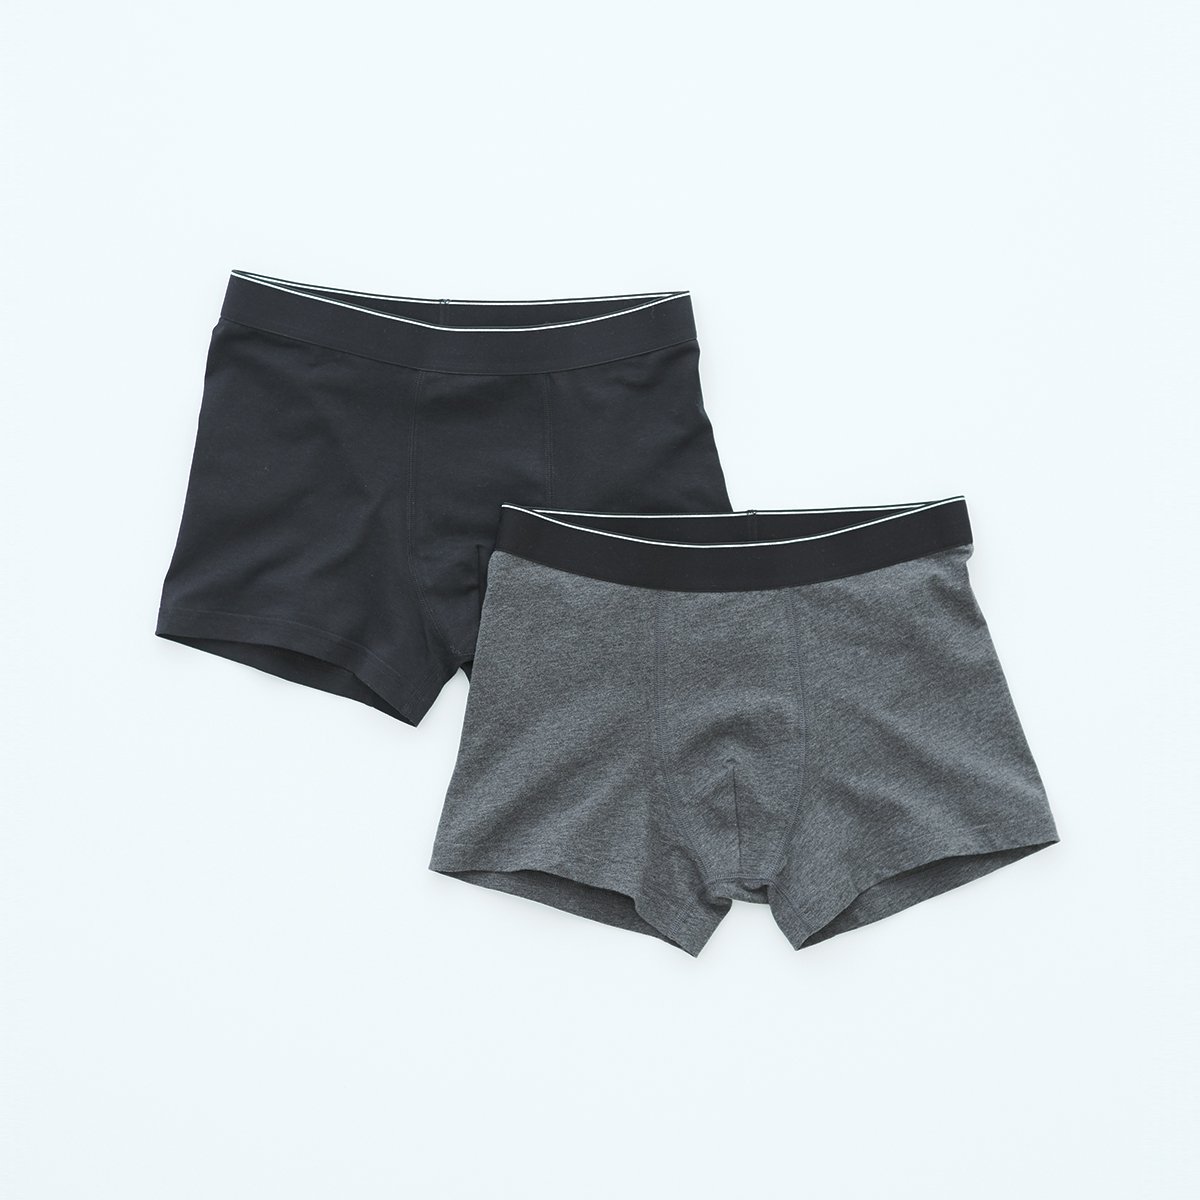 MUJI USA on X: Don't miss out on our special 4-day promotion! Men's and  Women's Innerwear are 20% OFF when you buy 2 or more, Boxers and Panties  are $24 when you